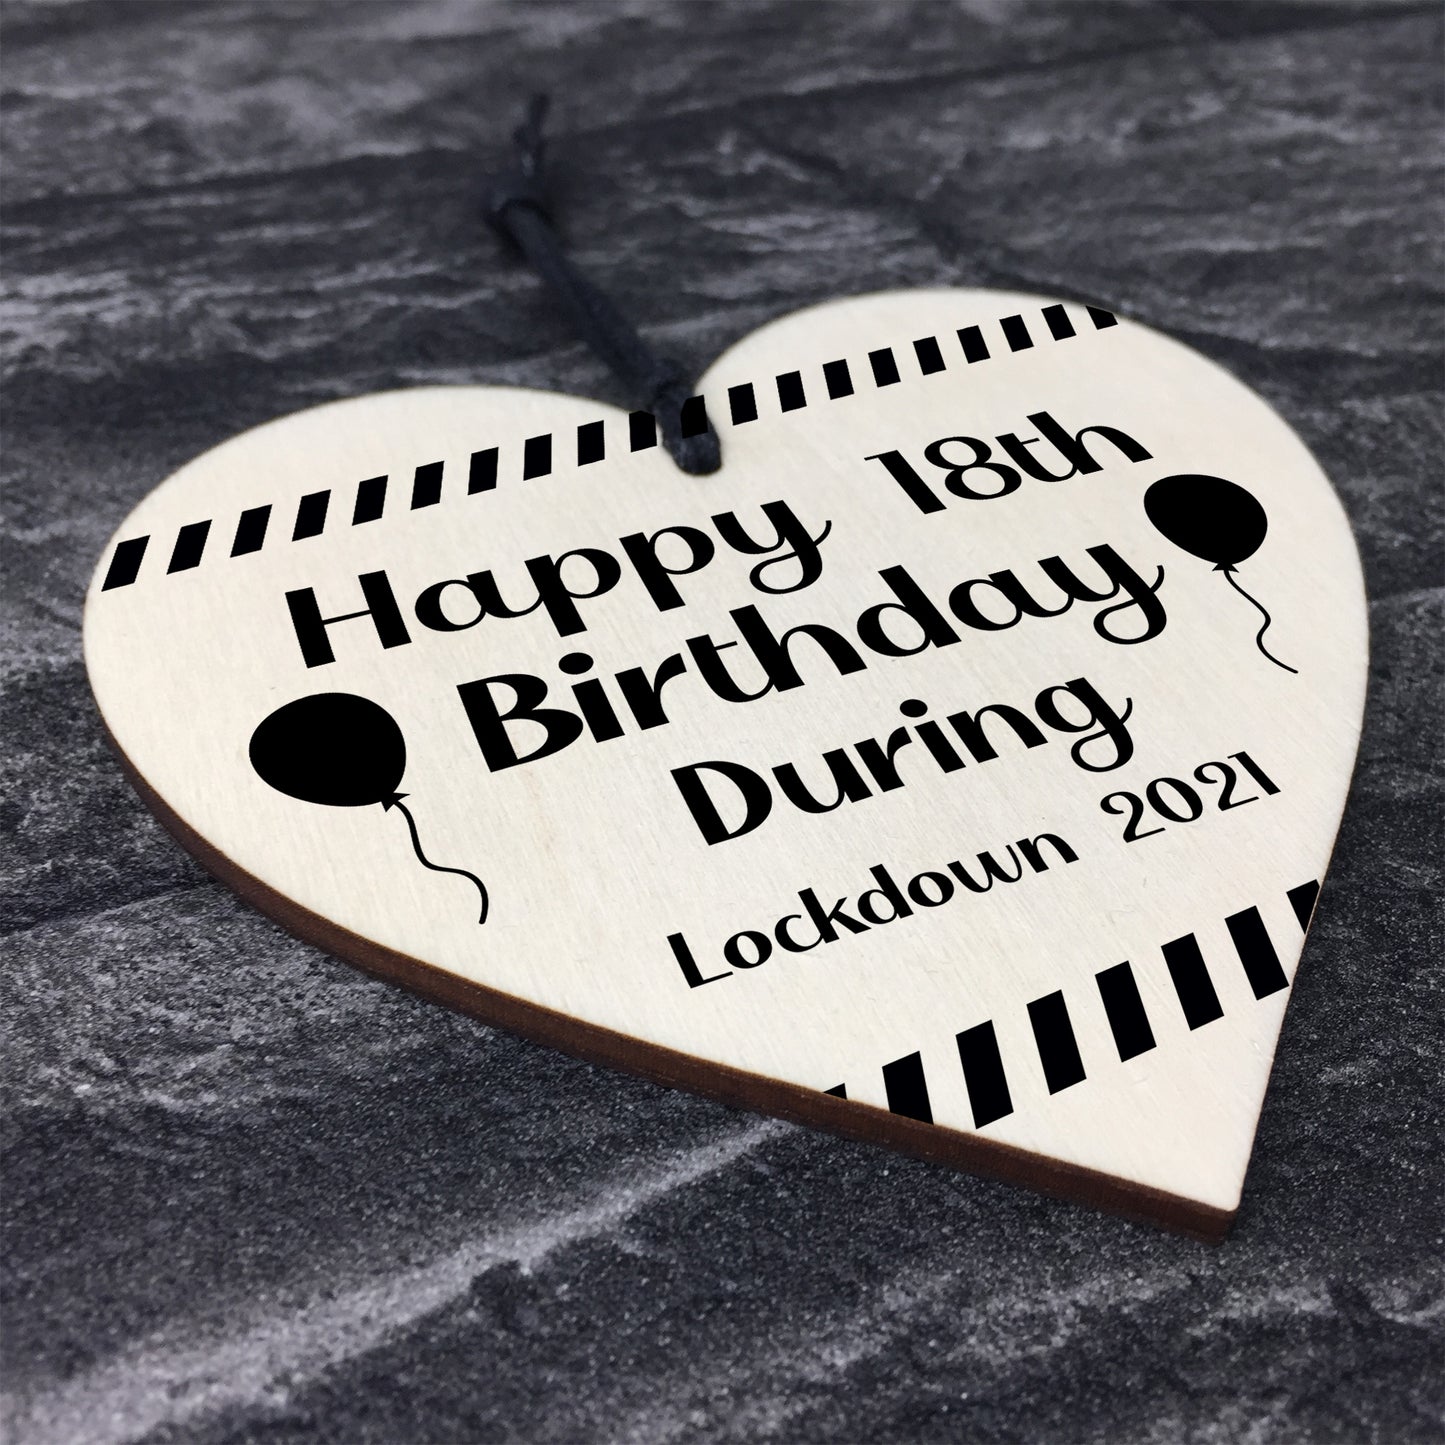 Personalised 16th 18th 21st Birthday In Lockdown 2021 Gift